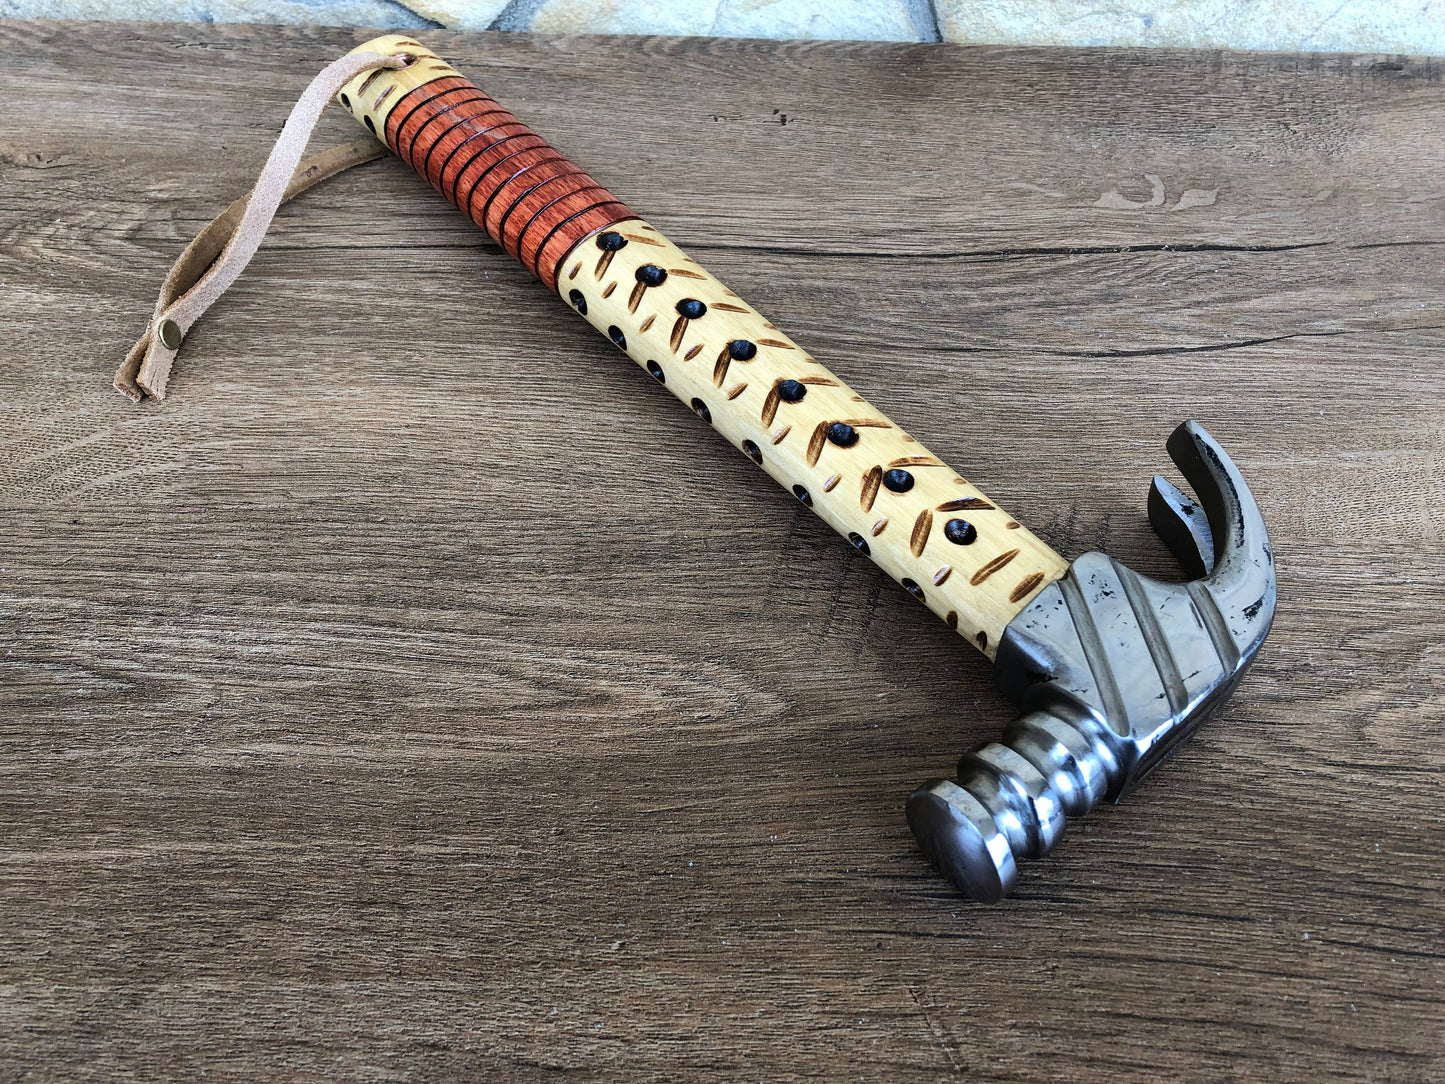 Claw hammer, hammer, gift for father, hand crafted hammer, hammer dad, hammer charm, hammer display, hammer for papa, hammer for grandpa